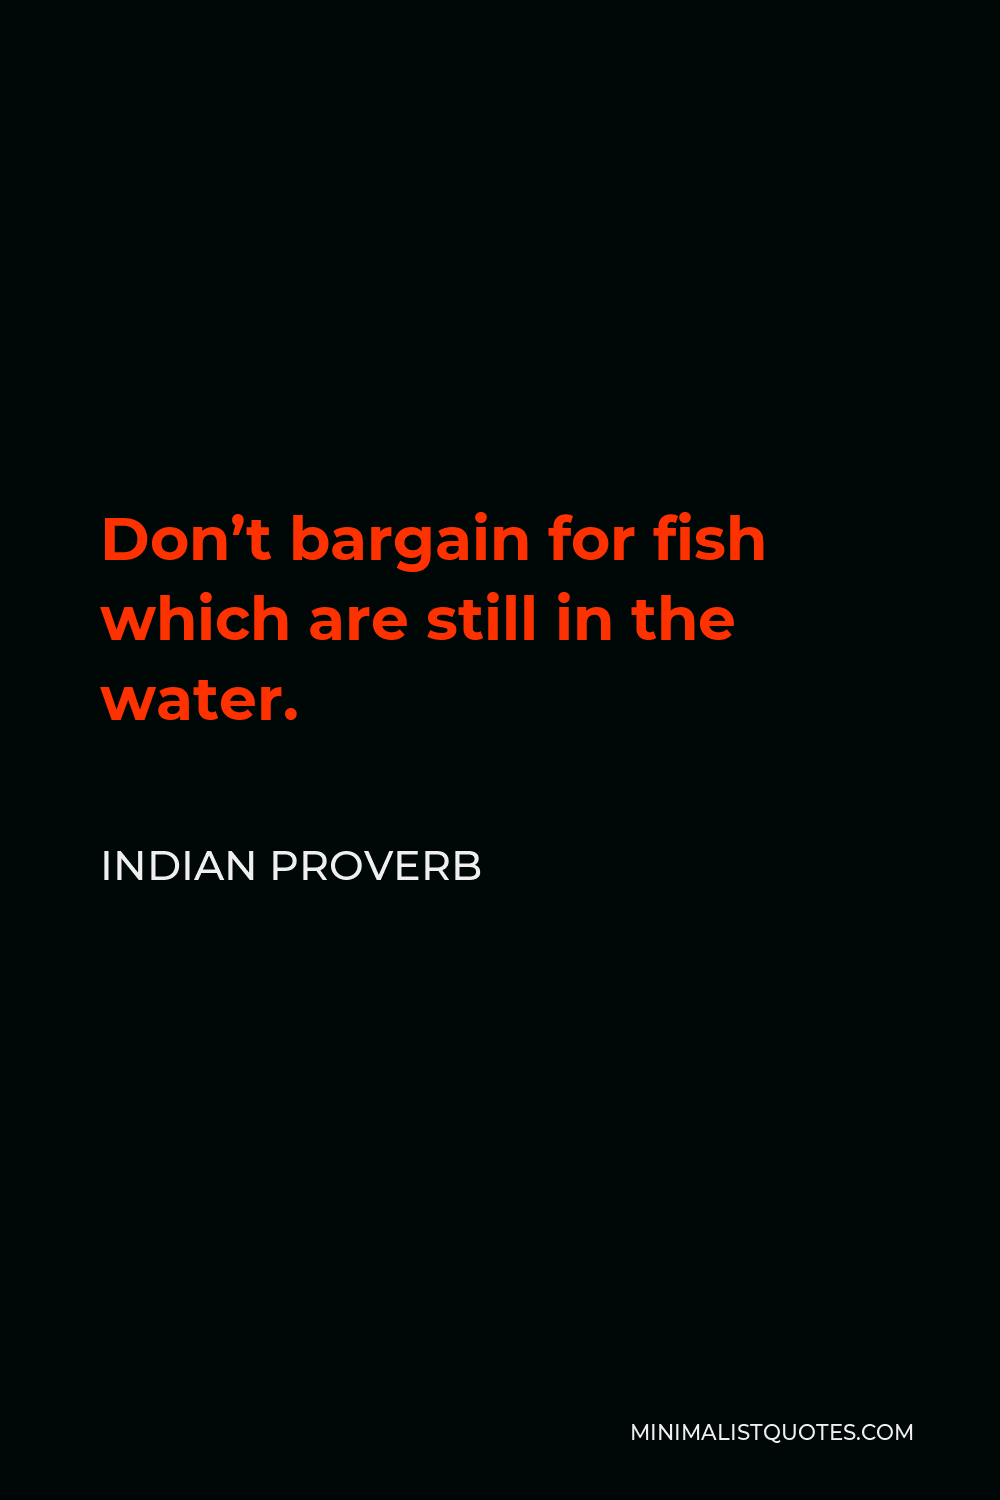 Indian Proverb Quote - Don’t bargain for fish which are still in the water.